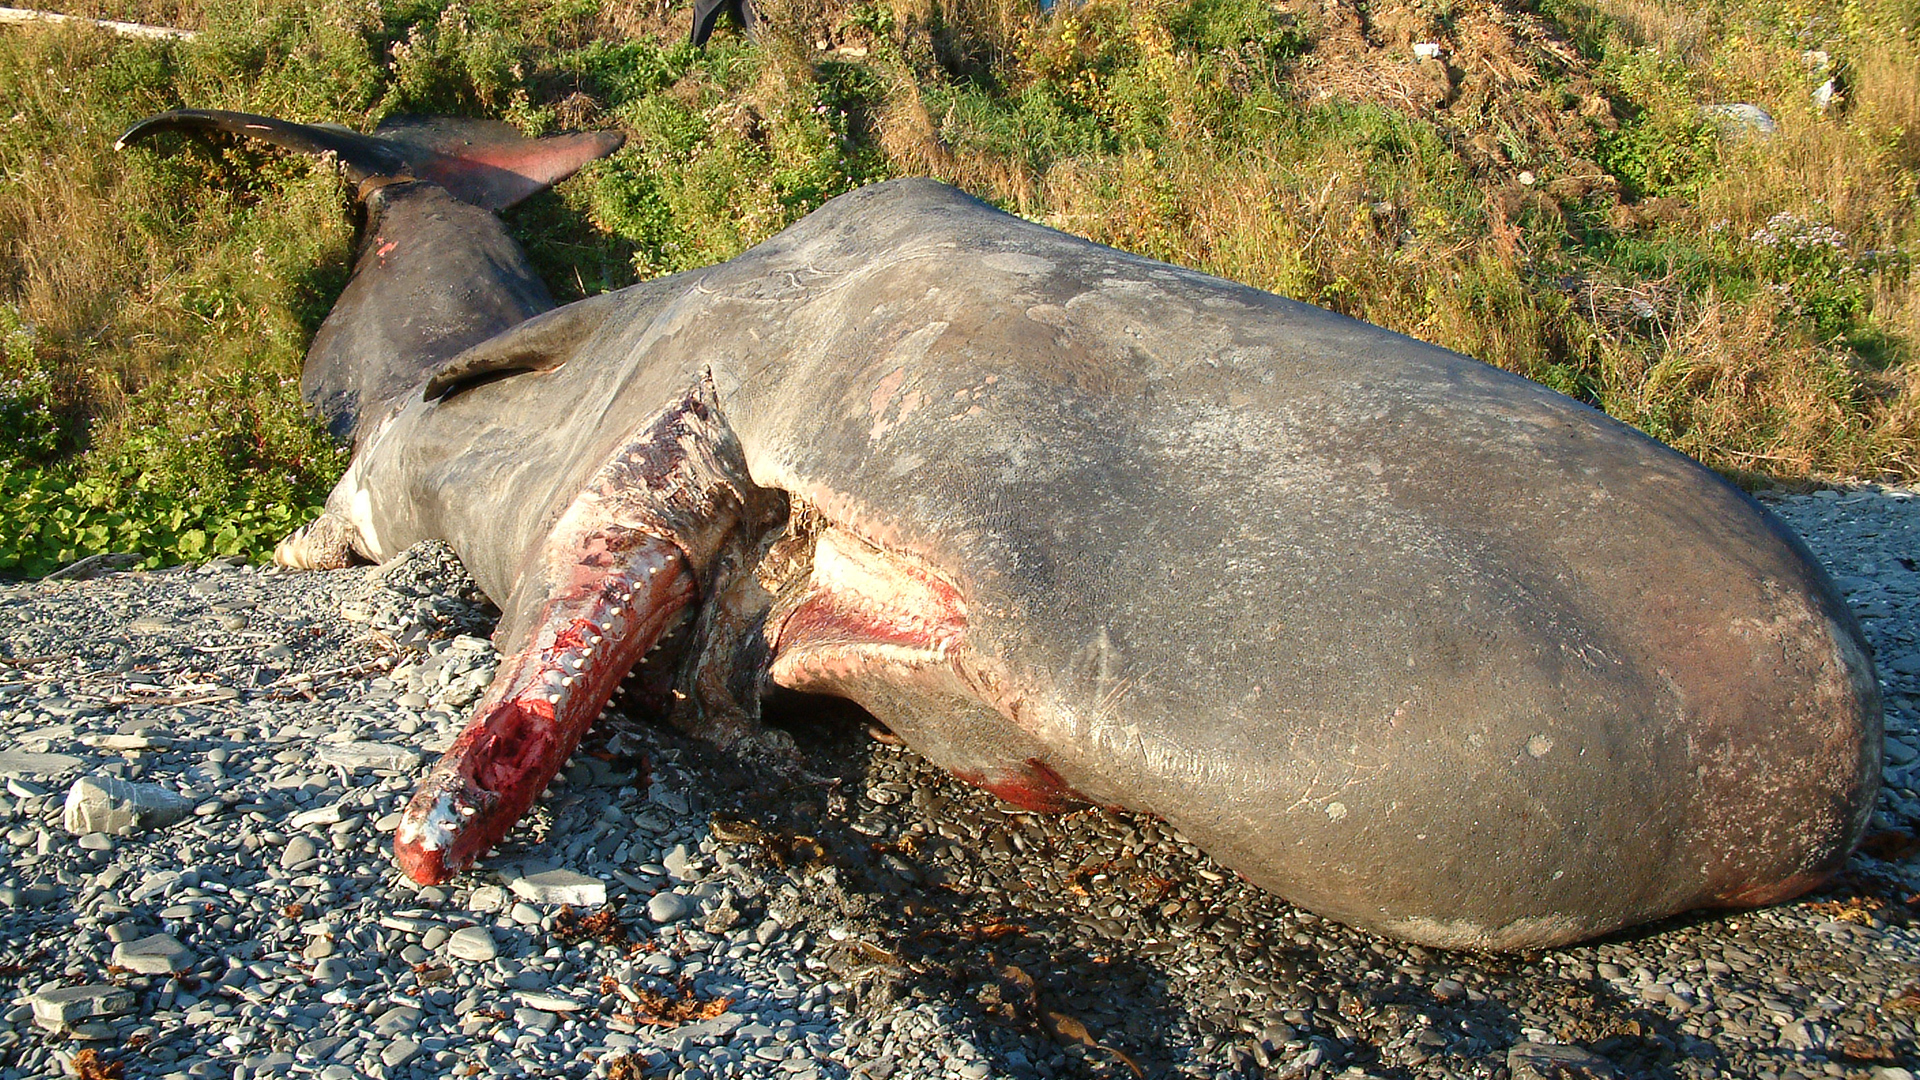 Photo of a sperm whale carcass on shore, with its head in the foreground.